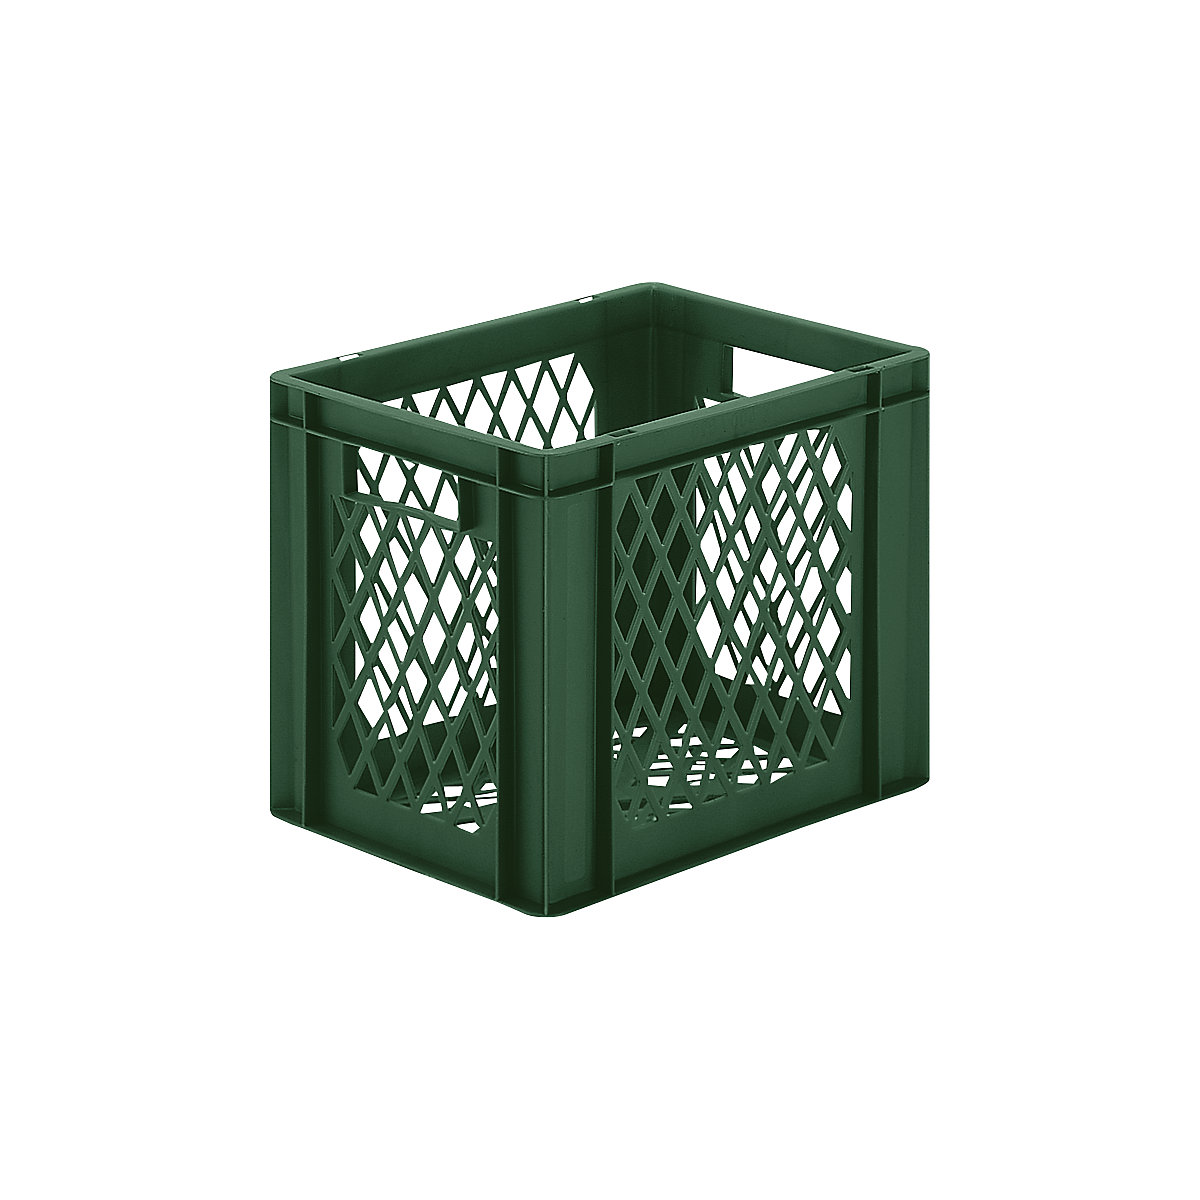 Euro stacking container, perforated walls and base, LxWxH 400 x 300 x 320 mm, green, pack of 5-4